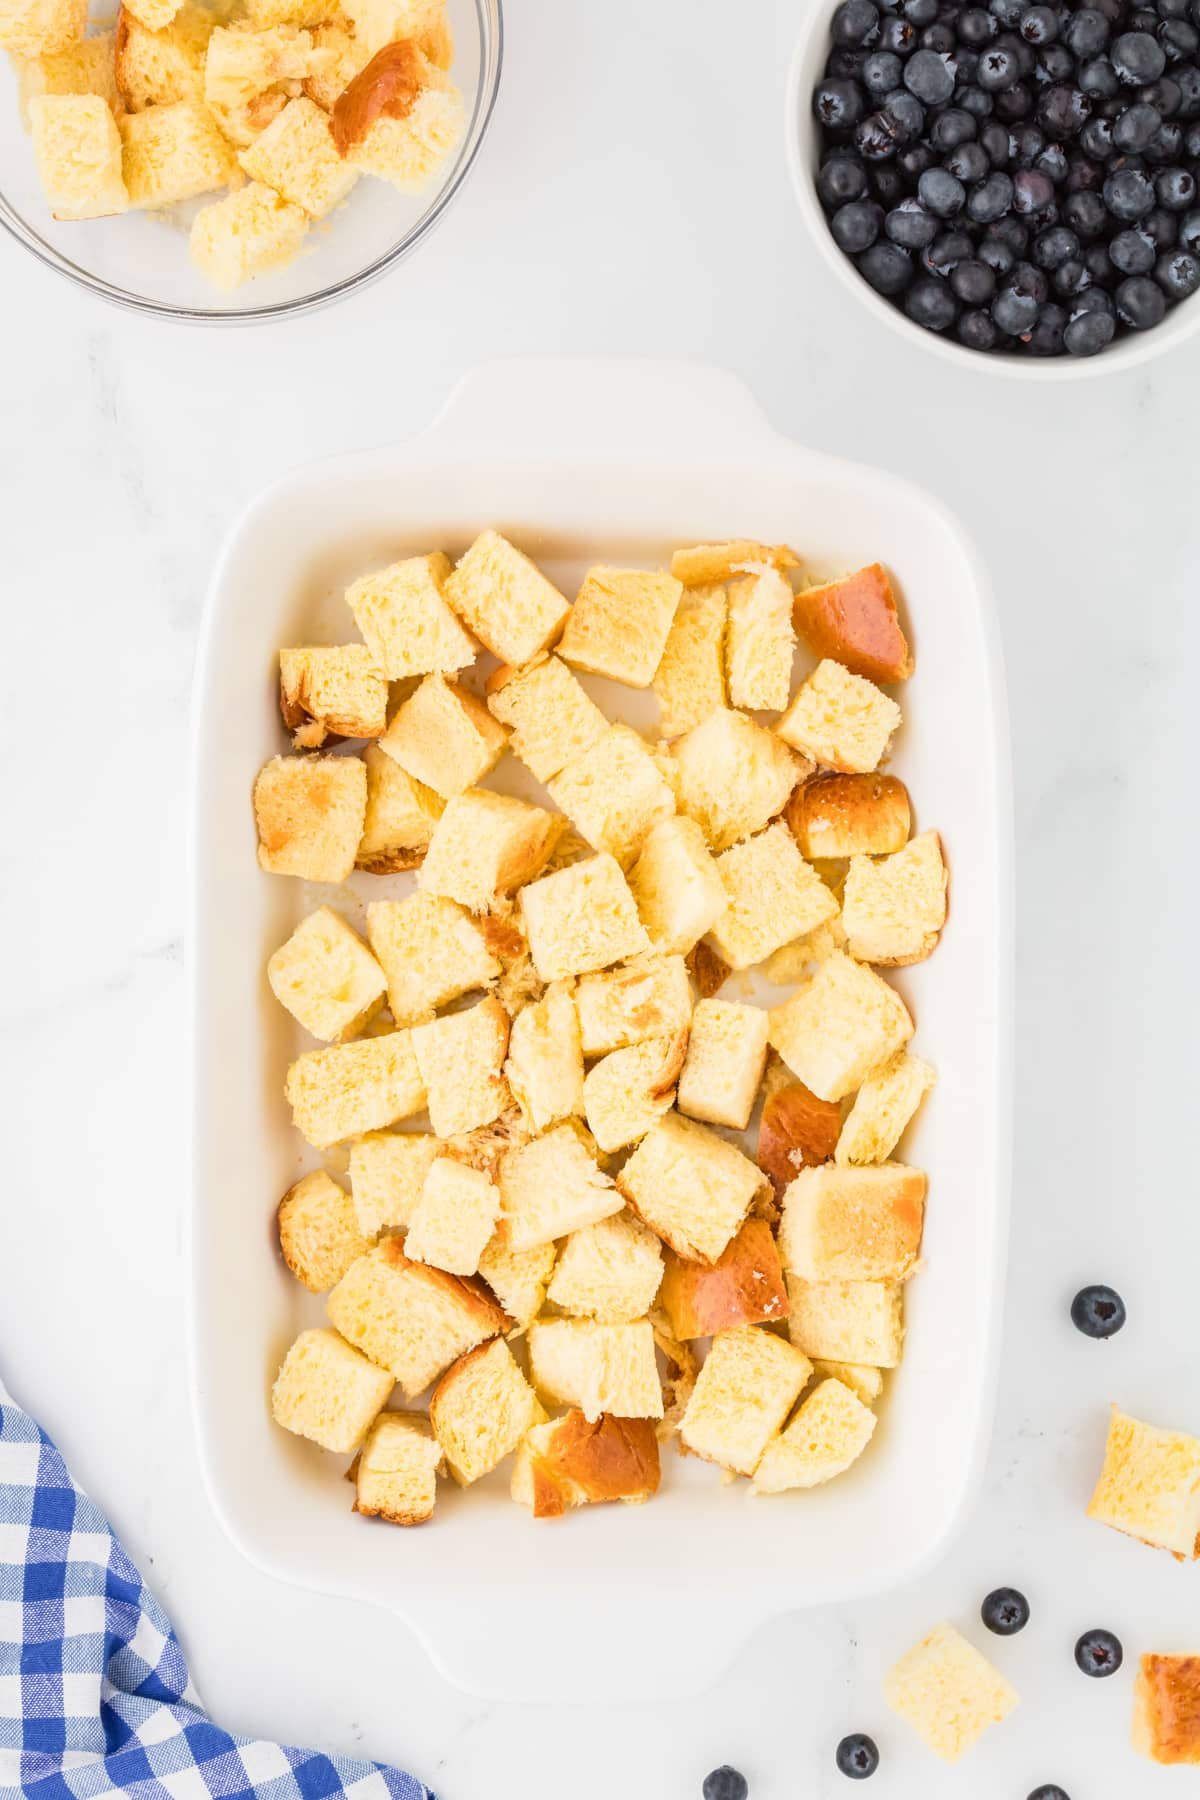 A baking dish with cubed bread in it.